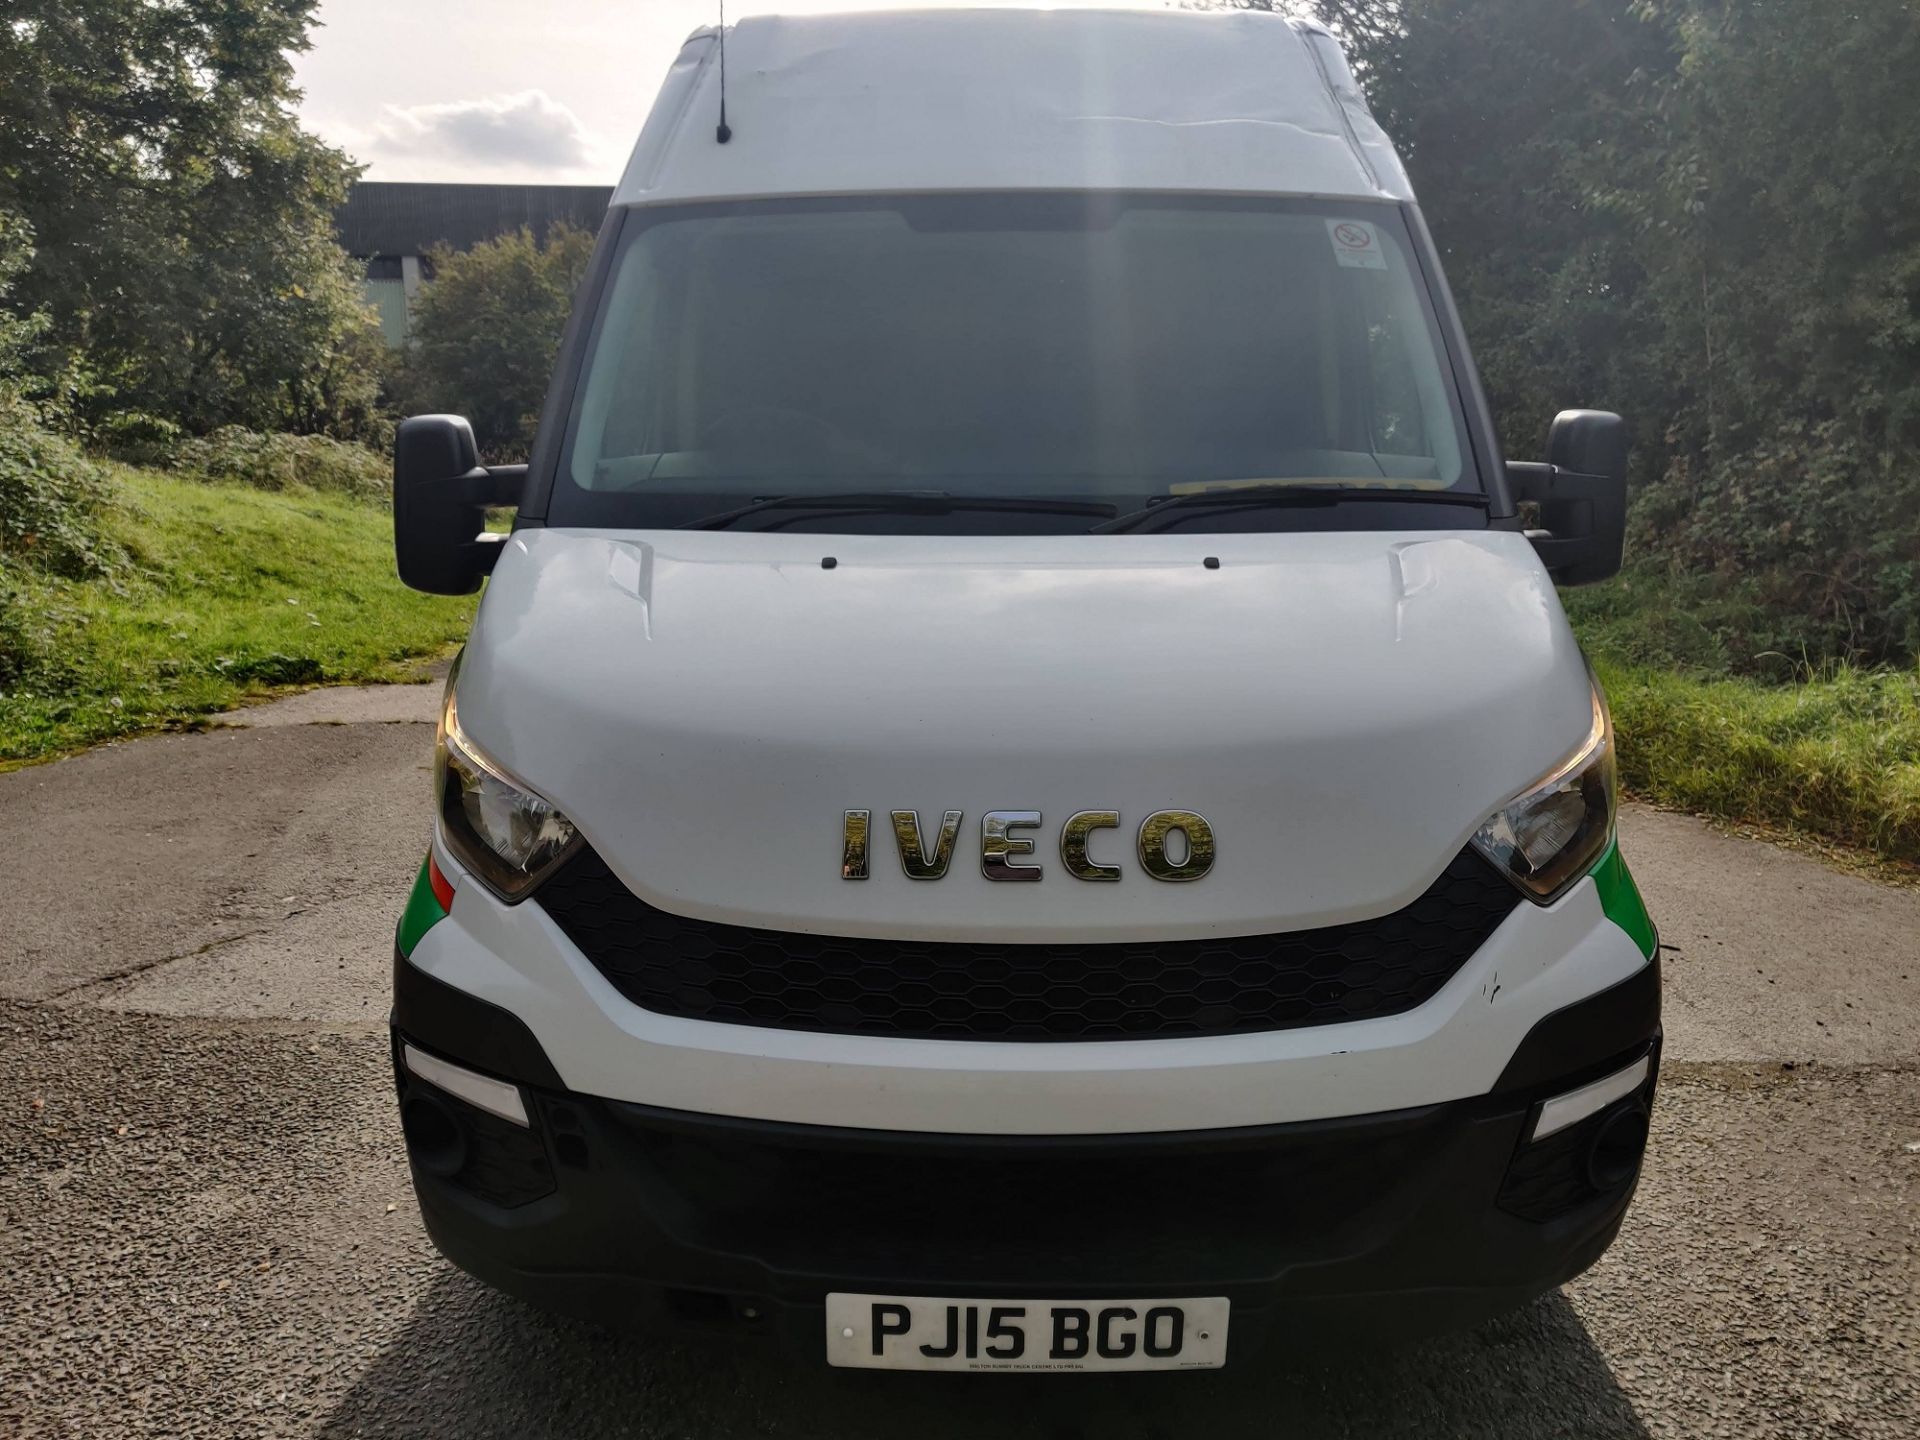 2015/15 REG IVECO DAILY 35S11 MWB WHITE 2.3 DIESEL PANEL VAN, SHOWING 0 FORMER KEEPERS *NO VAT* - Image 2 of 15